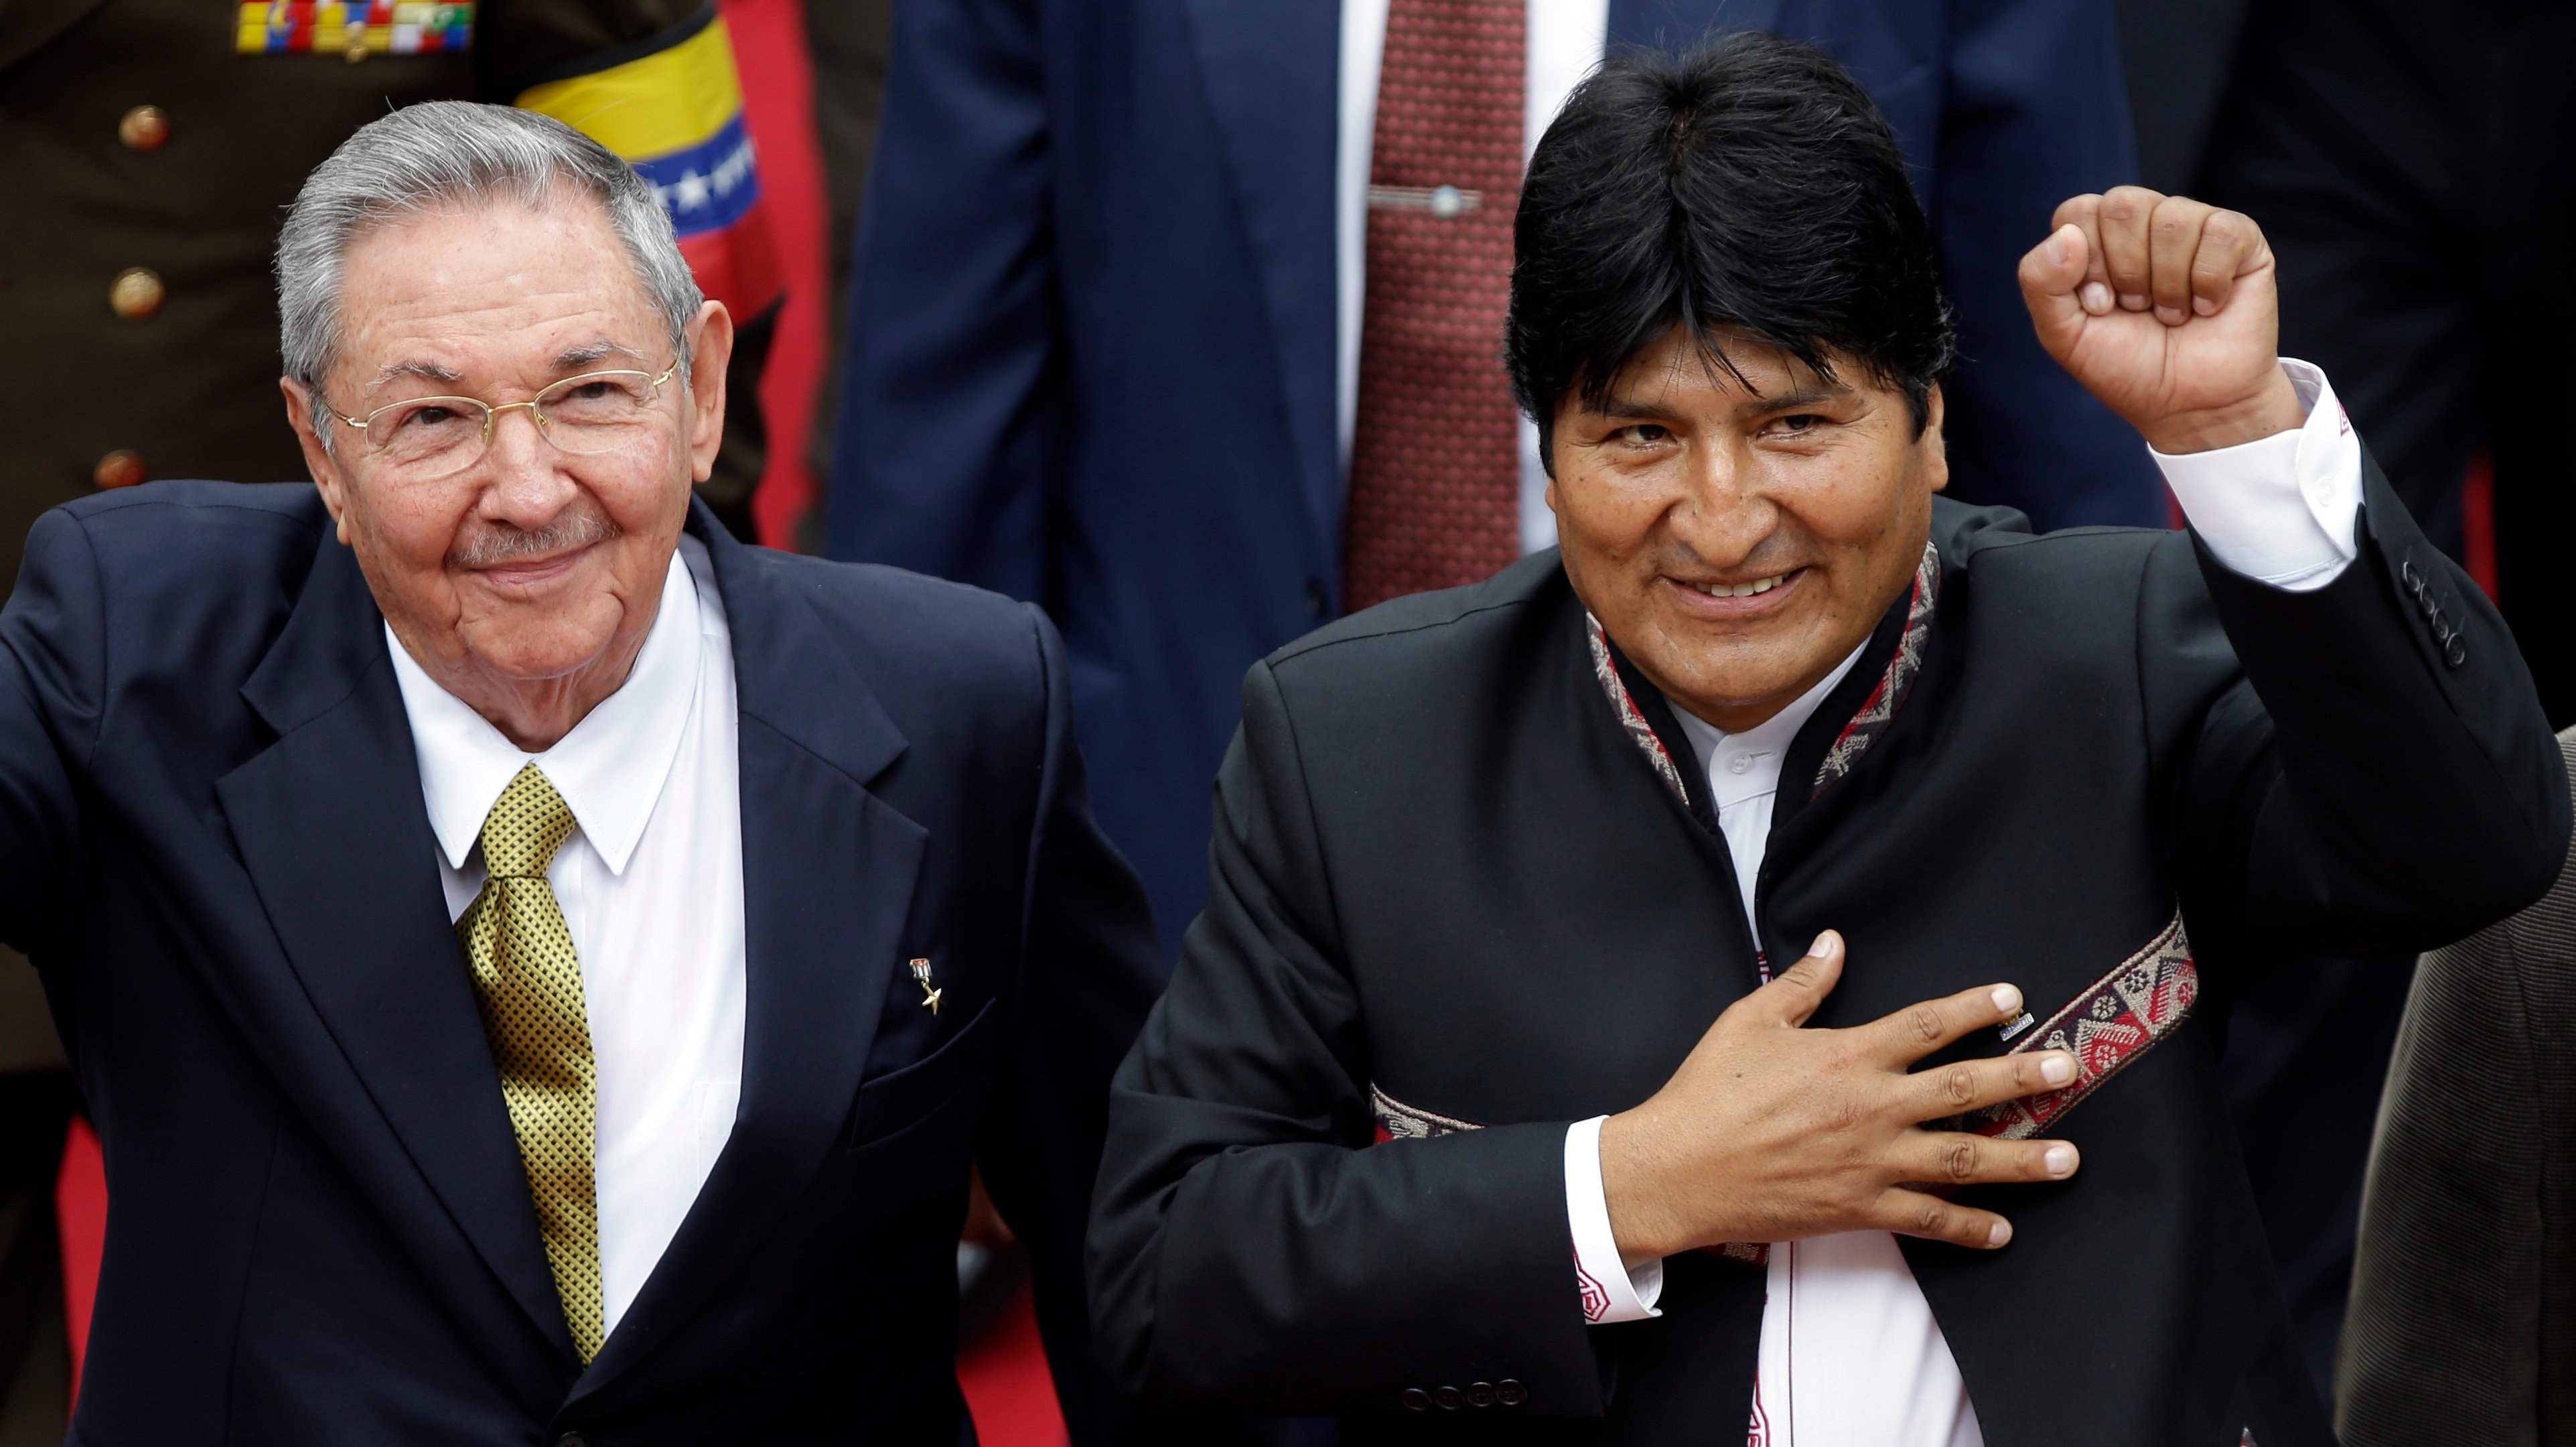 Bolivian President Evo Morales arrives to the National Assembly with Cuba's Raul Castro for the inauguration of Venezuela's President-elect Nicolas Maduro in Caracas, Venezuela, Friday, April 19, 2013. Morales said Wednesday he is expelling the U.S. Agency for International Development from Bolivia for allegedly seeking to undermine his leftist government.  (AP Photo/Fernando Llano)